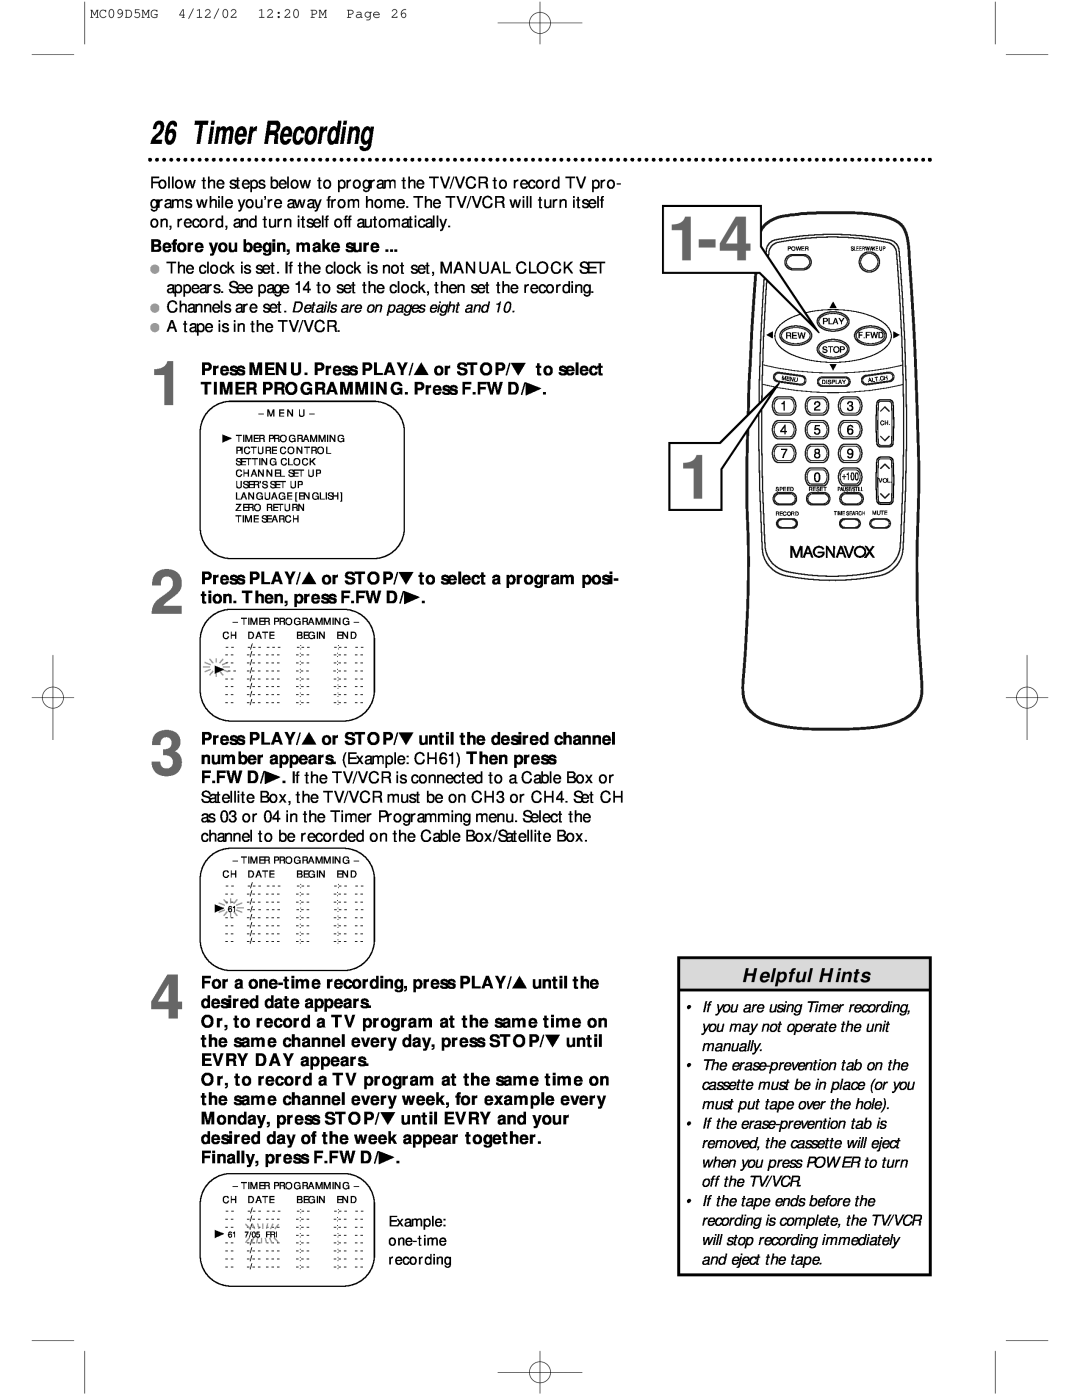 Magnavox MC09D5MG Timer Recording, Helpful Hints, Before you begin, make sure, tion. Then, press F.FWD/B, EVRY DAY appears 